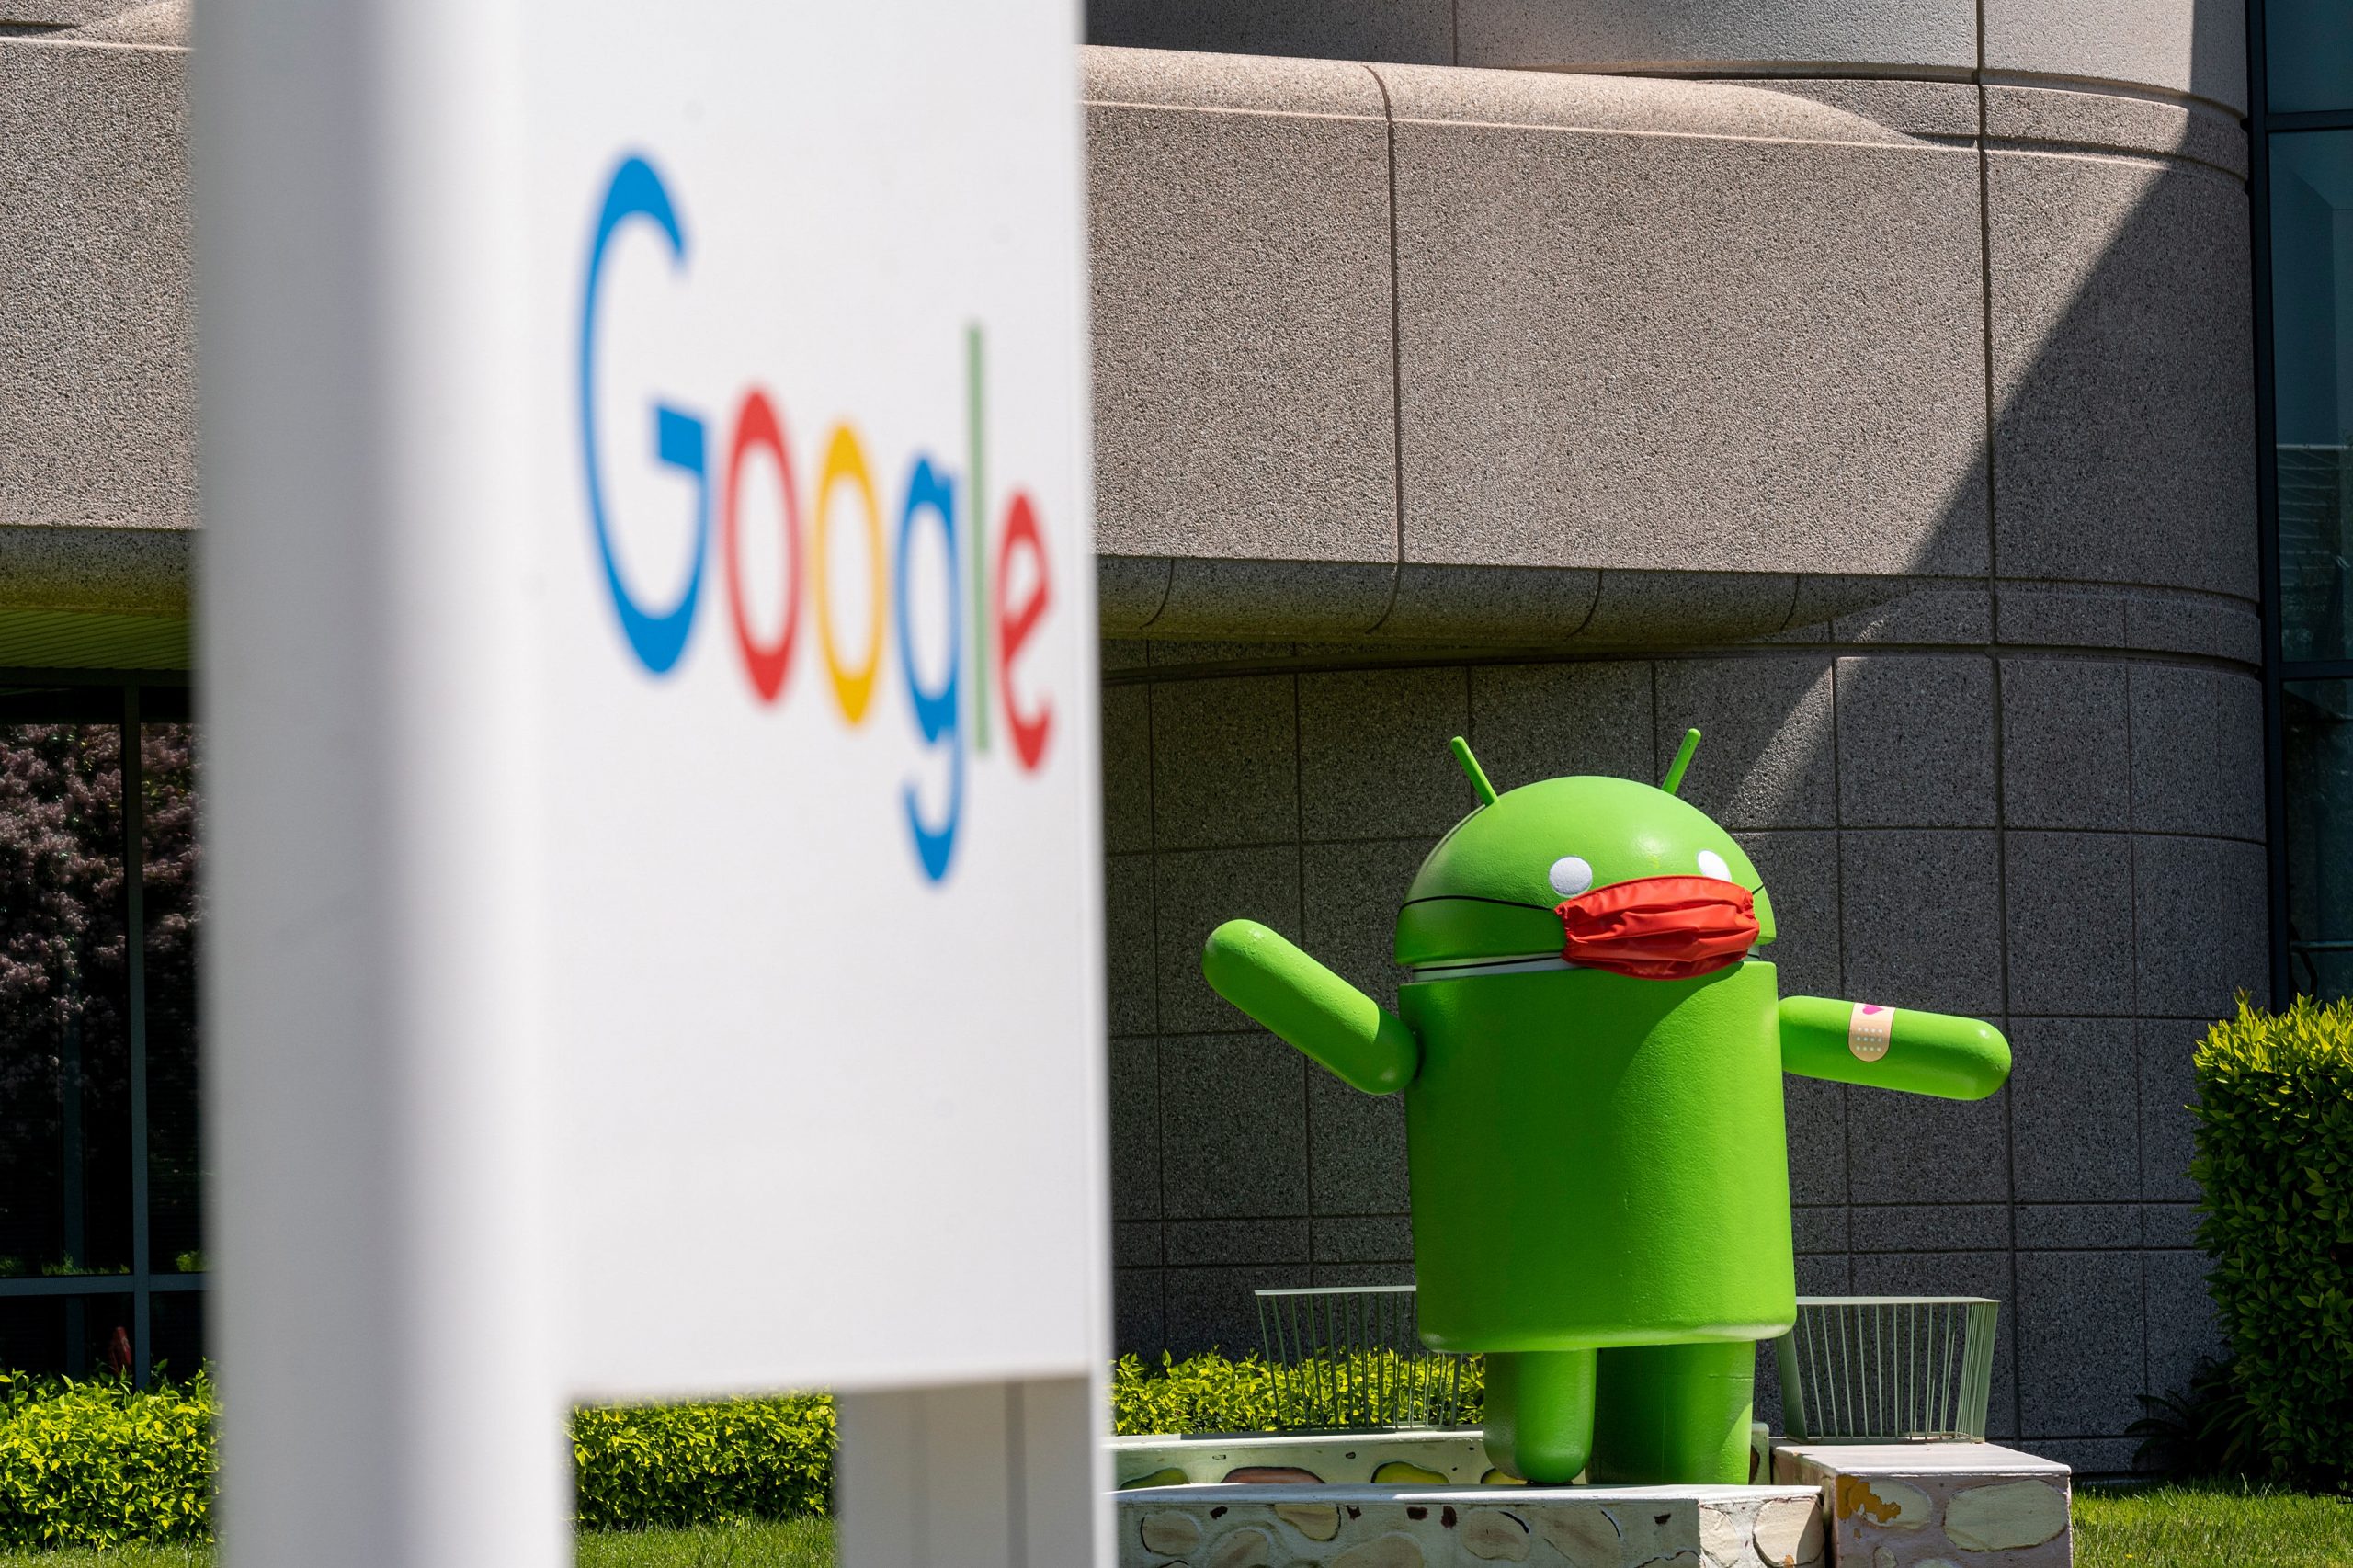 States bring a new antitrust suit against Google over its mobile app store